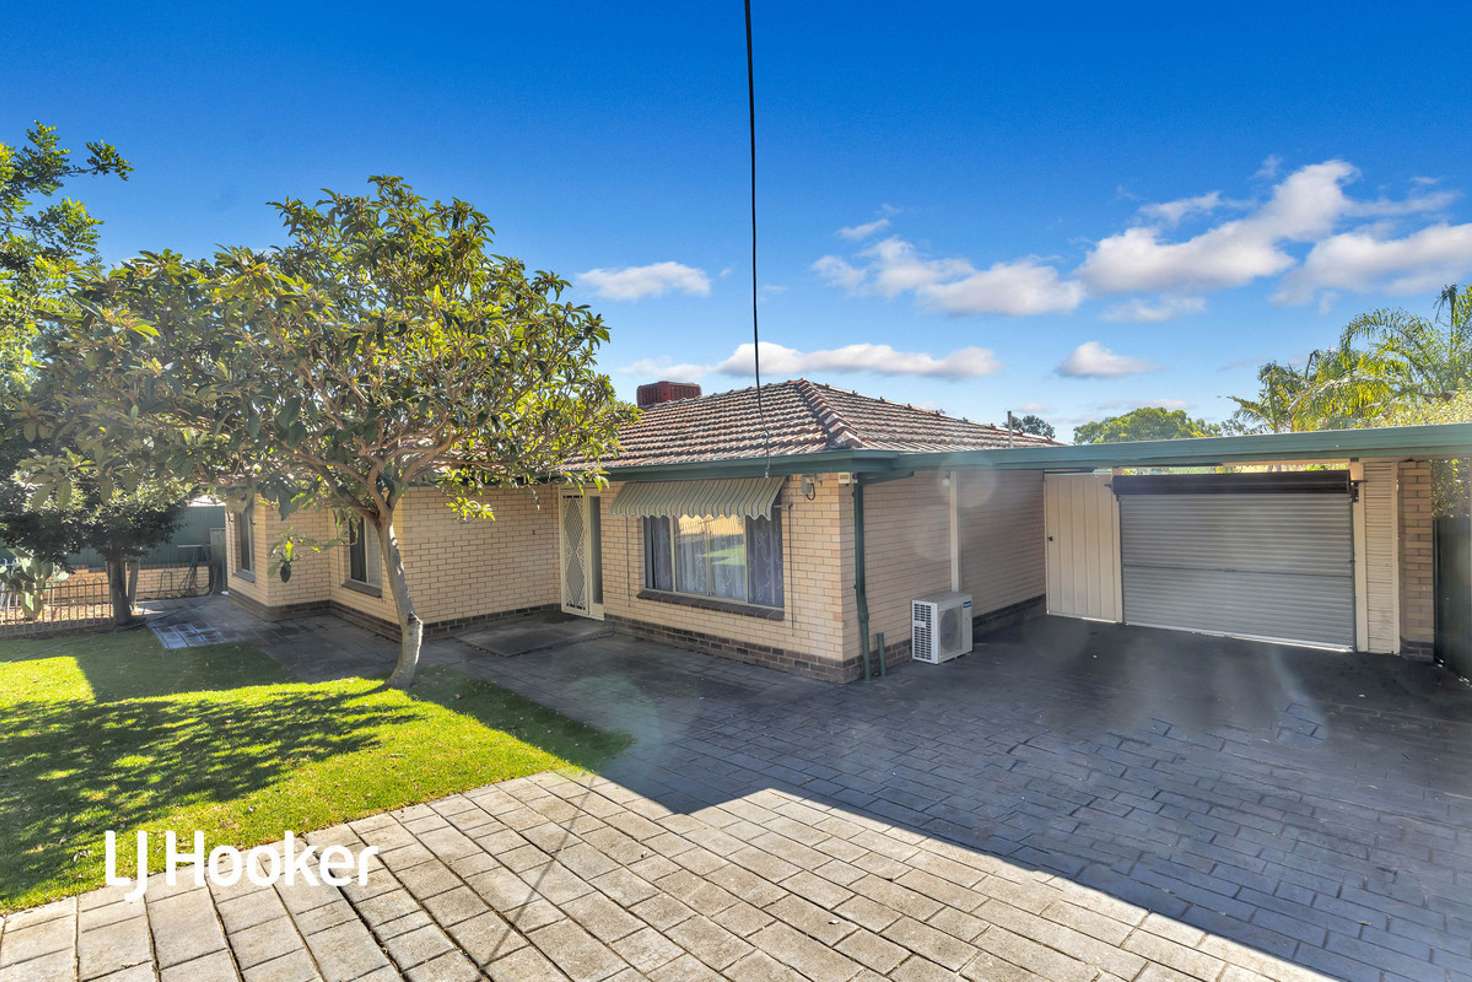 Main view of Homely house listing, 24 Thorndon Crescent, Paradise SA 5075